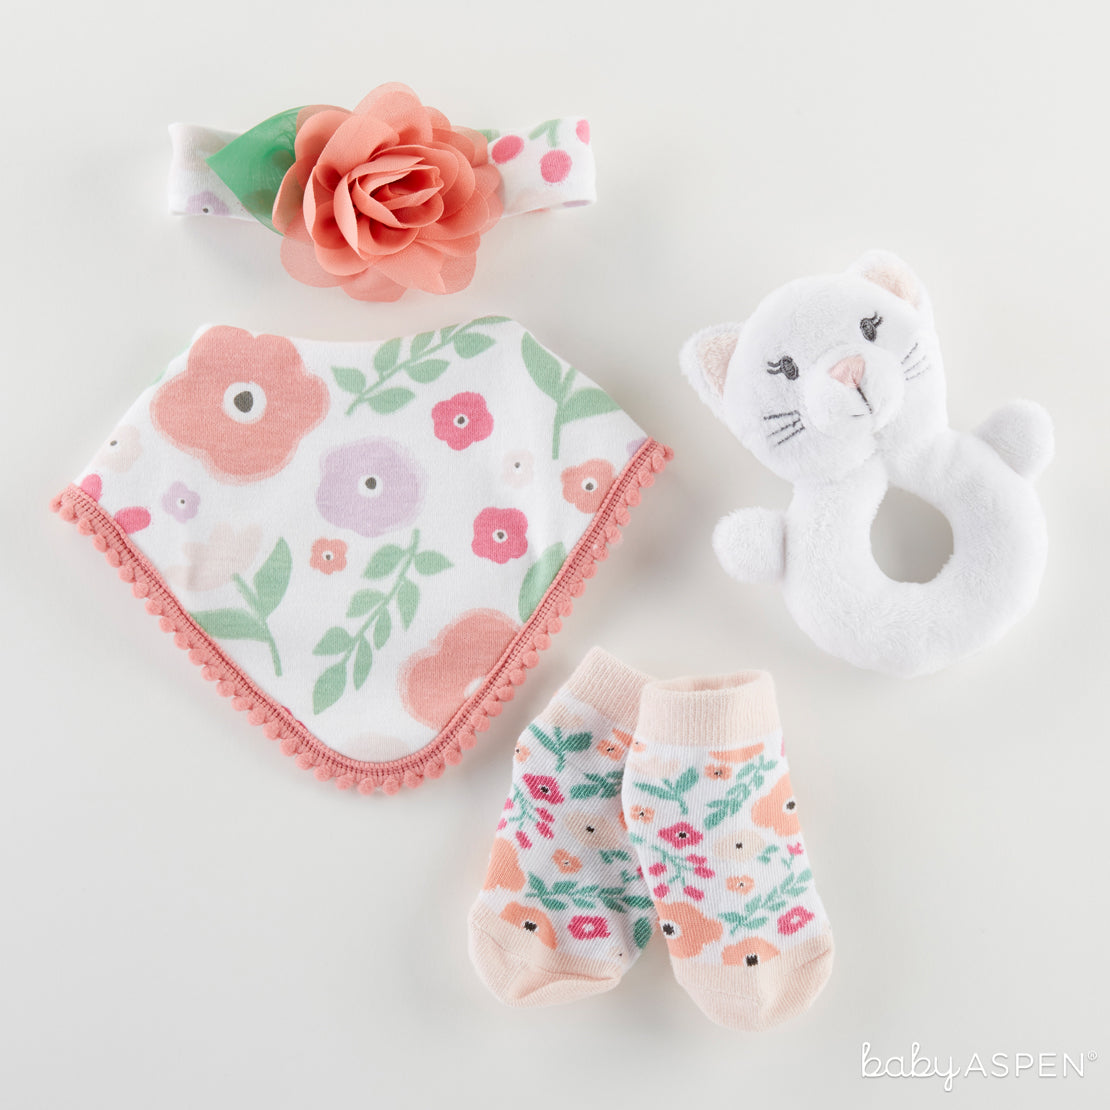 Pretty Posies 4-Piece Gift Set | Purrrfectly Adorable Gifts For Baby + A Giveaway | Baby Aspen